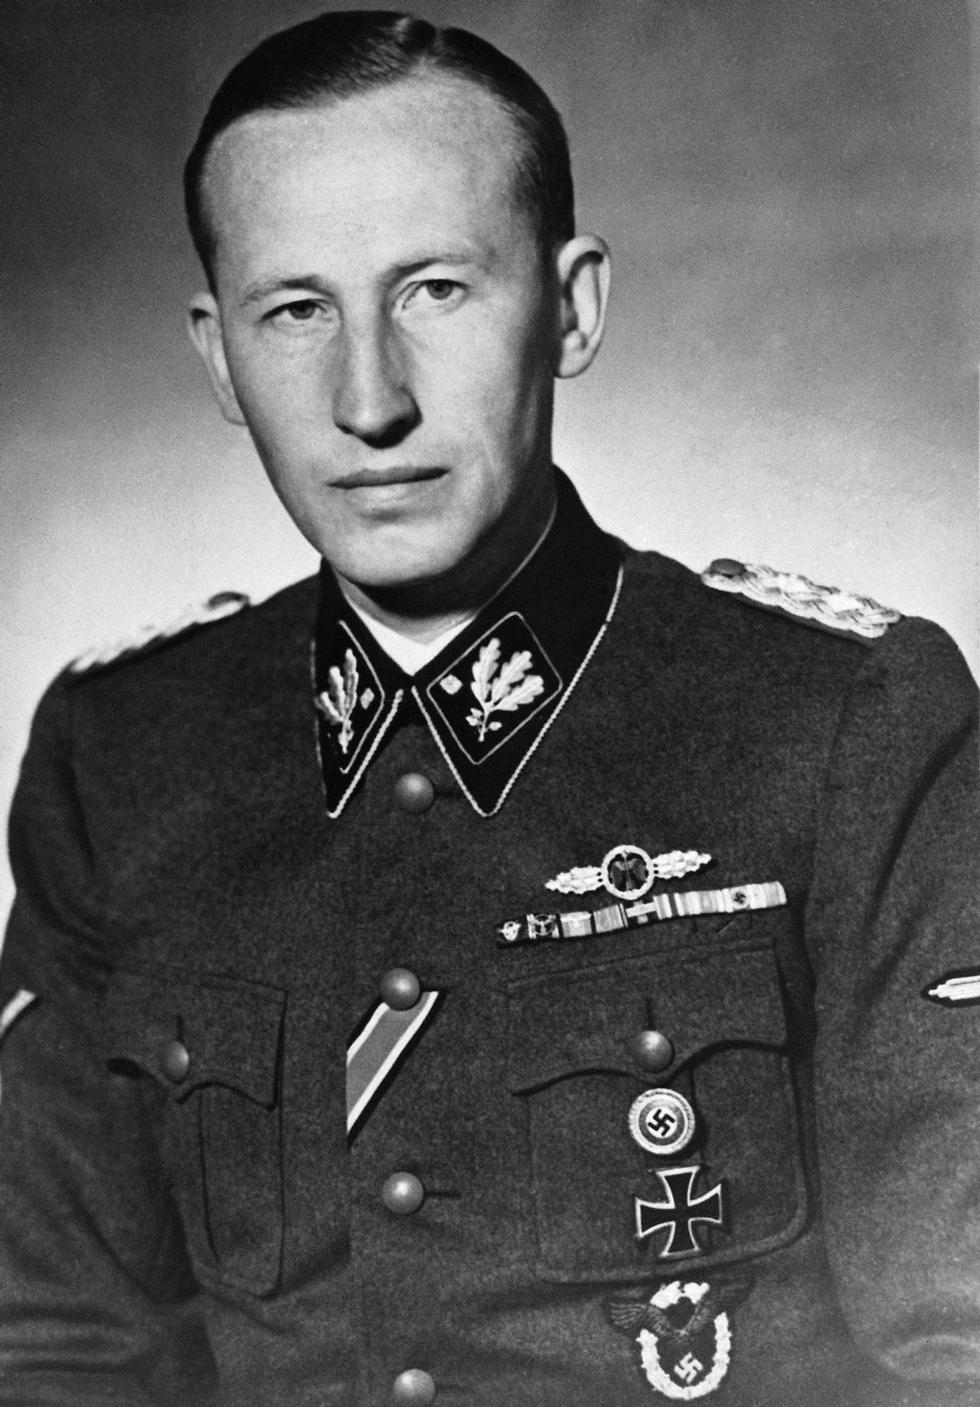 Nazi leader Reinhard Heydrich in an unknown location sometime in 1942. Lina Heydrich, the widow of assassinated Heydrich, one of the main architects of the Holocaust, was among the most prominent recipients of pensions for 'victims of war' who were injured in World War II. (Photo: AP)